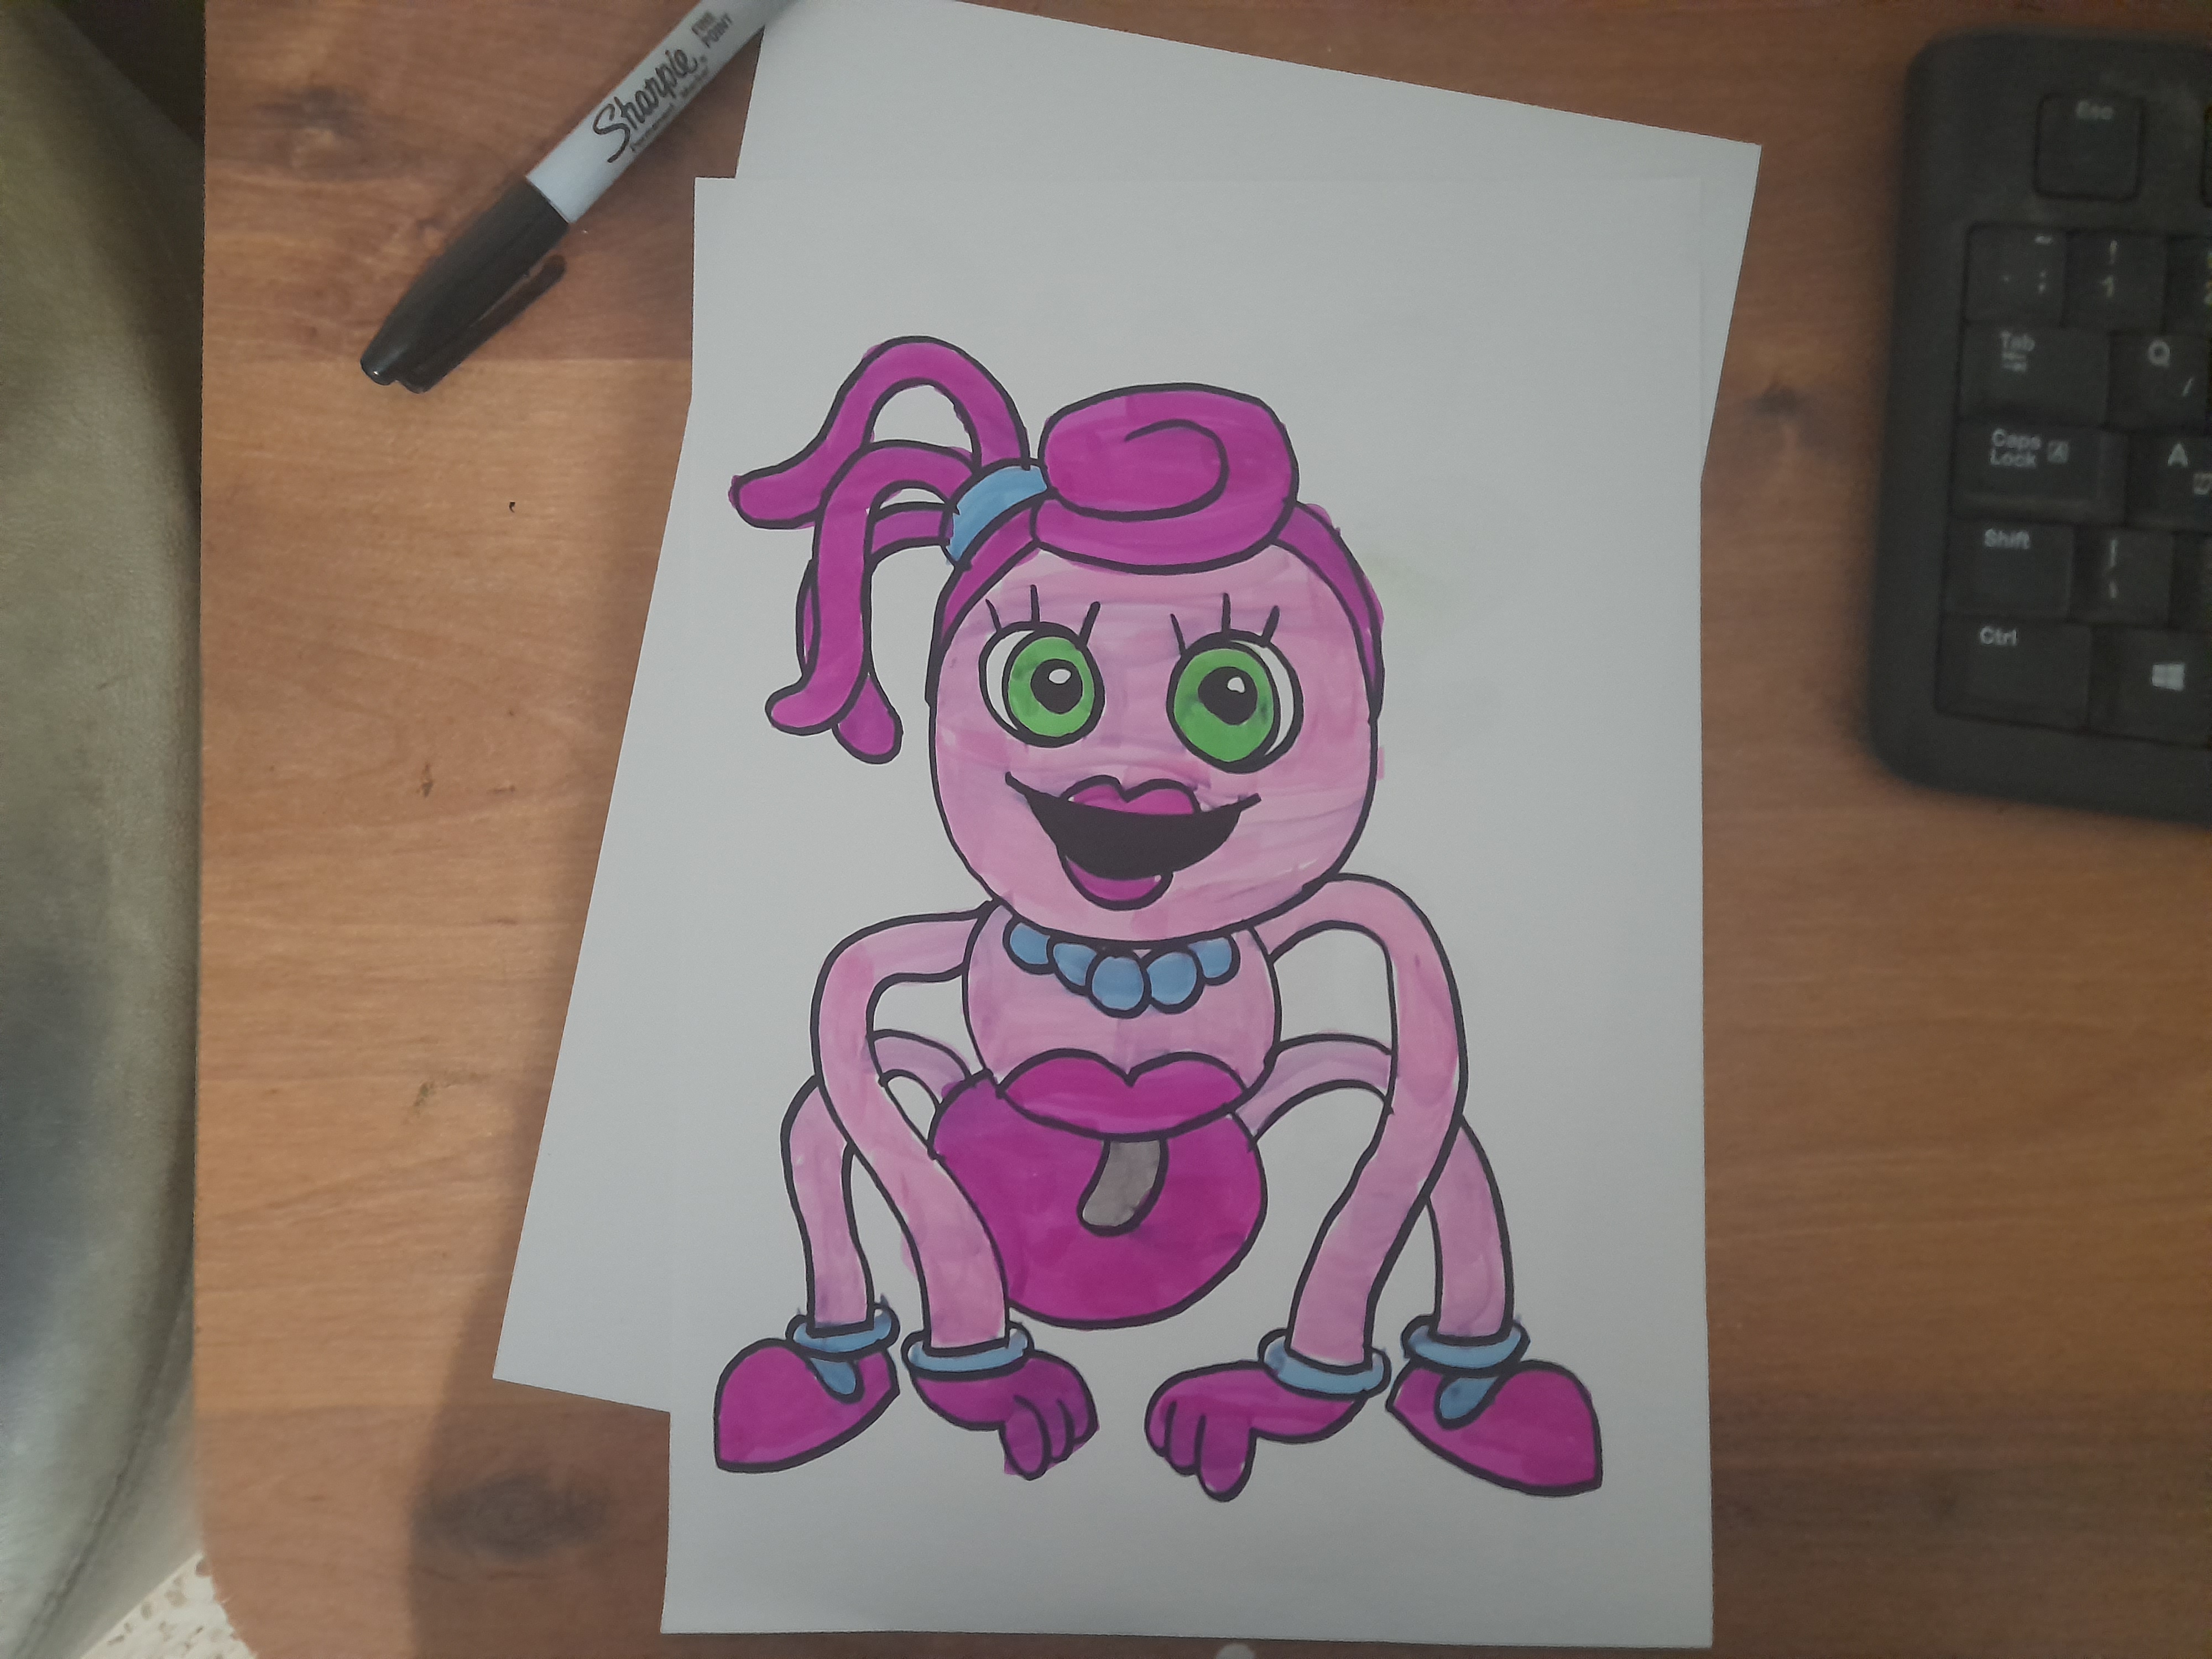 How to Draw Mommy Long Legs, Poppy Playtime